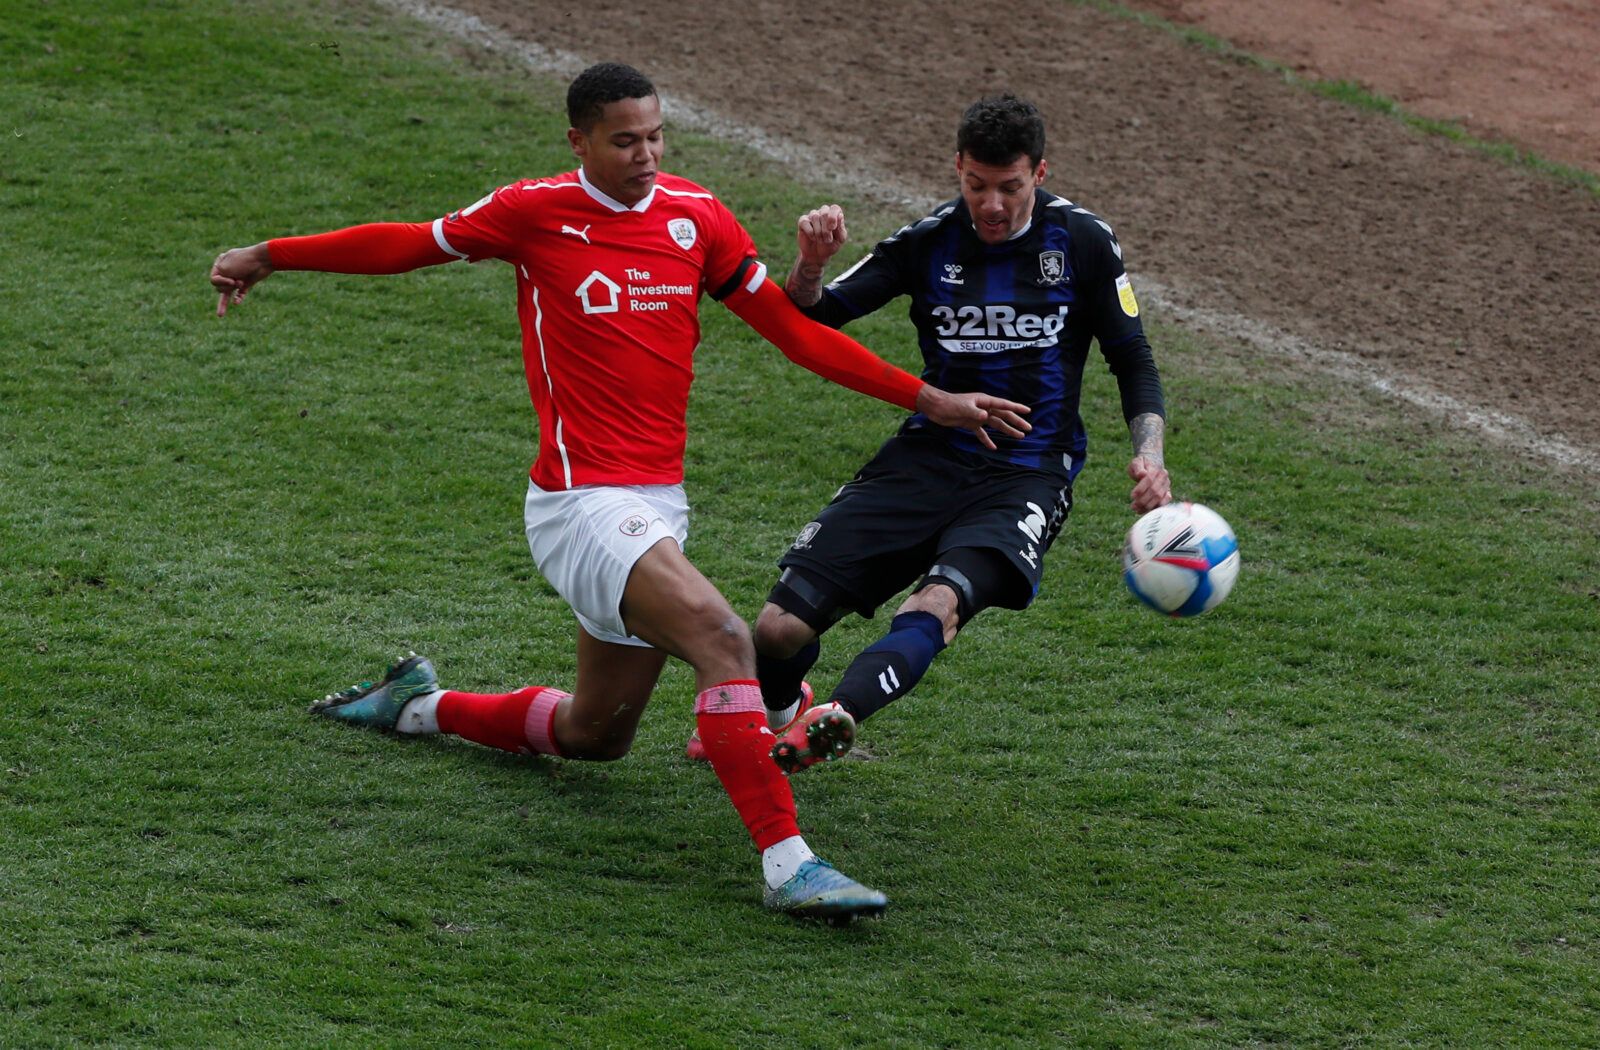 Soccer Football - Championship - Barnsley v Middlesbrough - Oakwell, Barnsley, Britain - April 10, 2021 Middlesbrough's Marvin Johnson in action with Barnsley's Toby Sibbick Action Images/Lee Smith EDITORIAL USE ONLY. No use with unauthorized audio, video, data, fixture lists, club/league logos or 'live' services. Online in-match use limited to 75 images, no video emulation. No use in betting, games or single club /league/player publications.  Please contact your account representative for furth